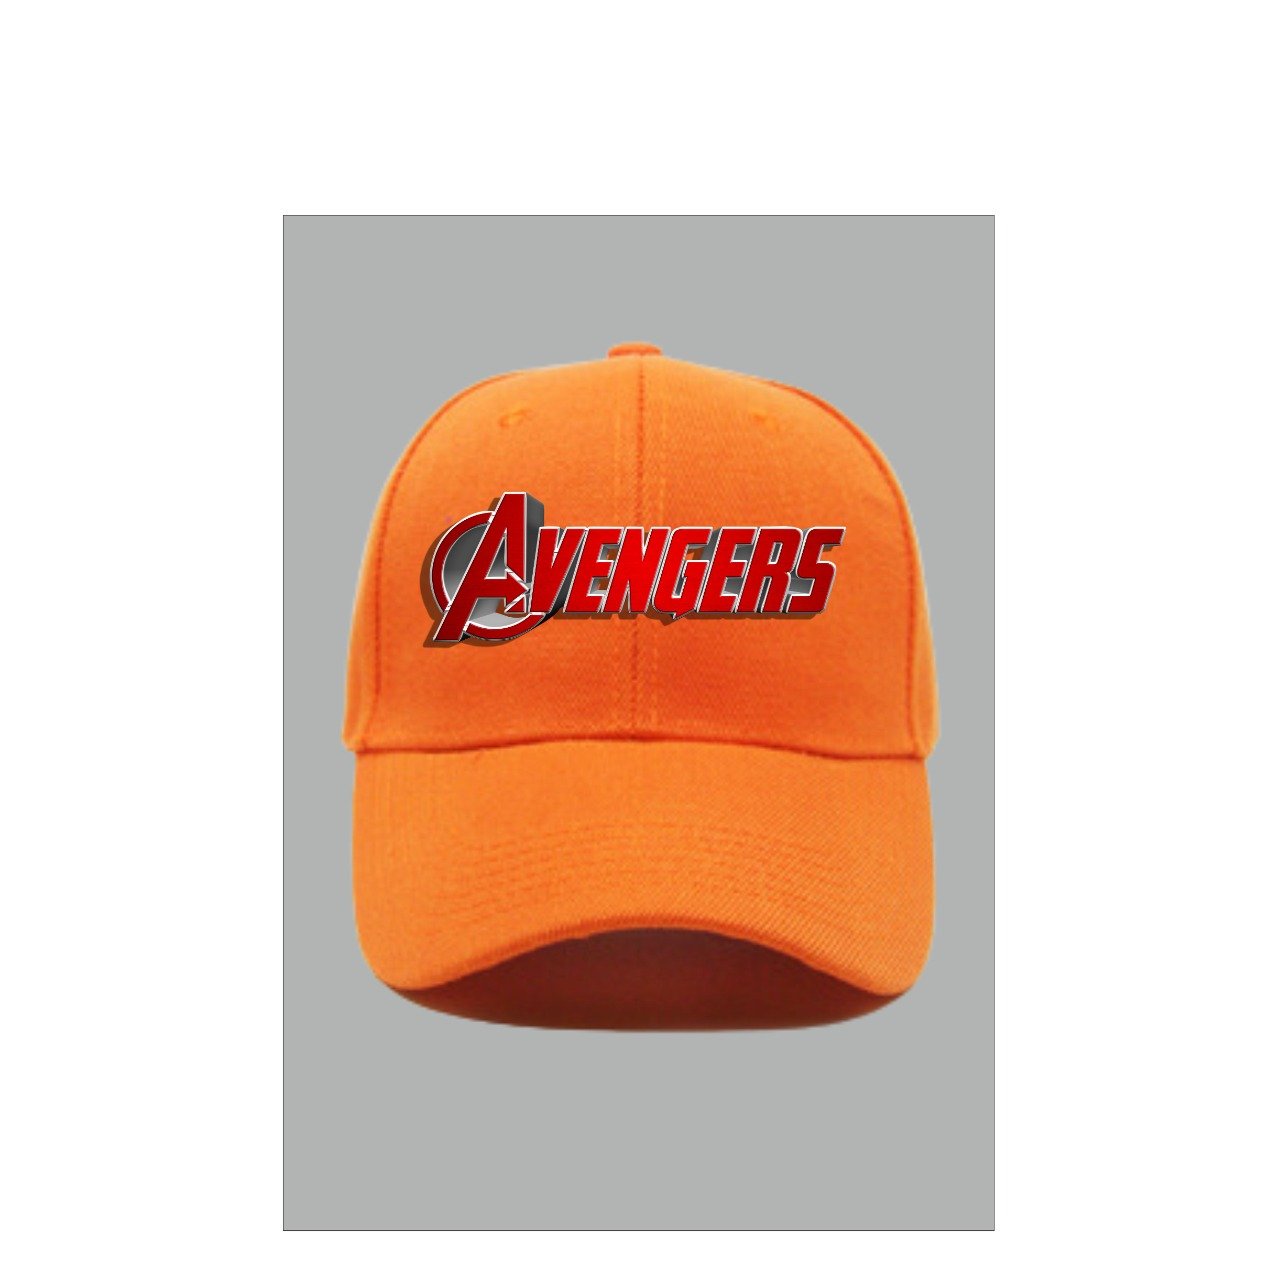 Avengers Title Printed Cap (Free Size)